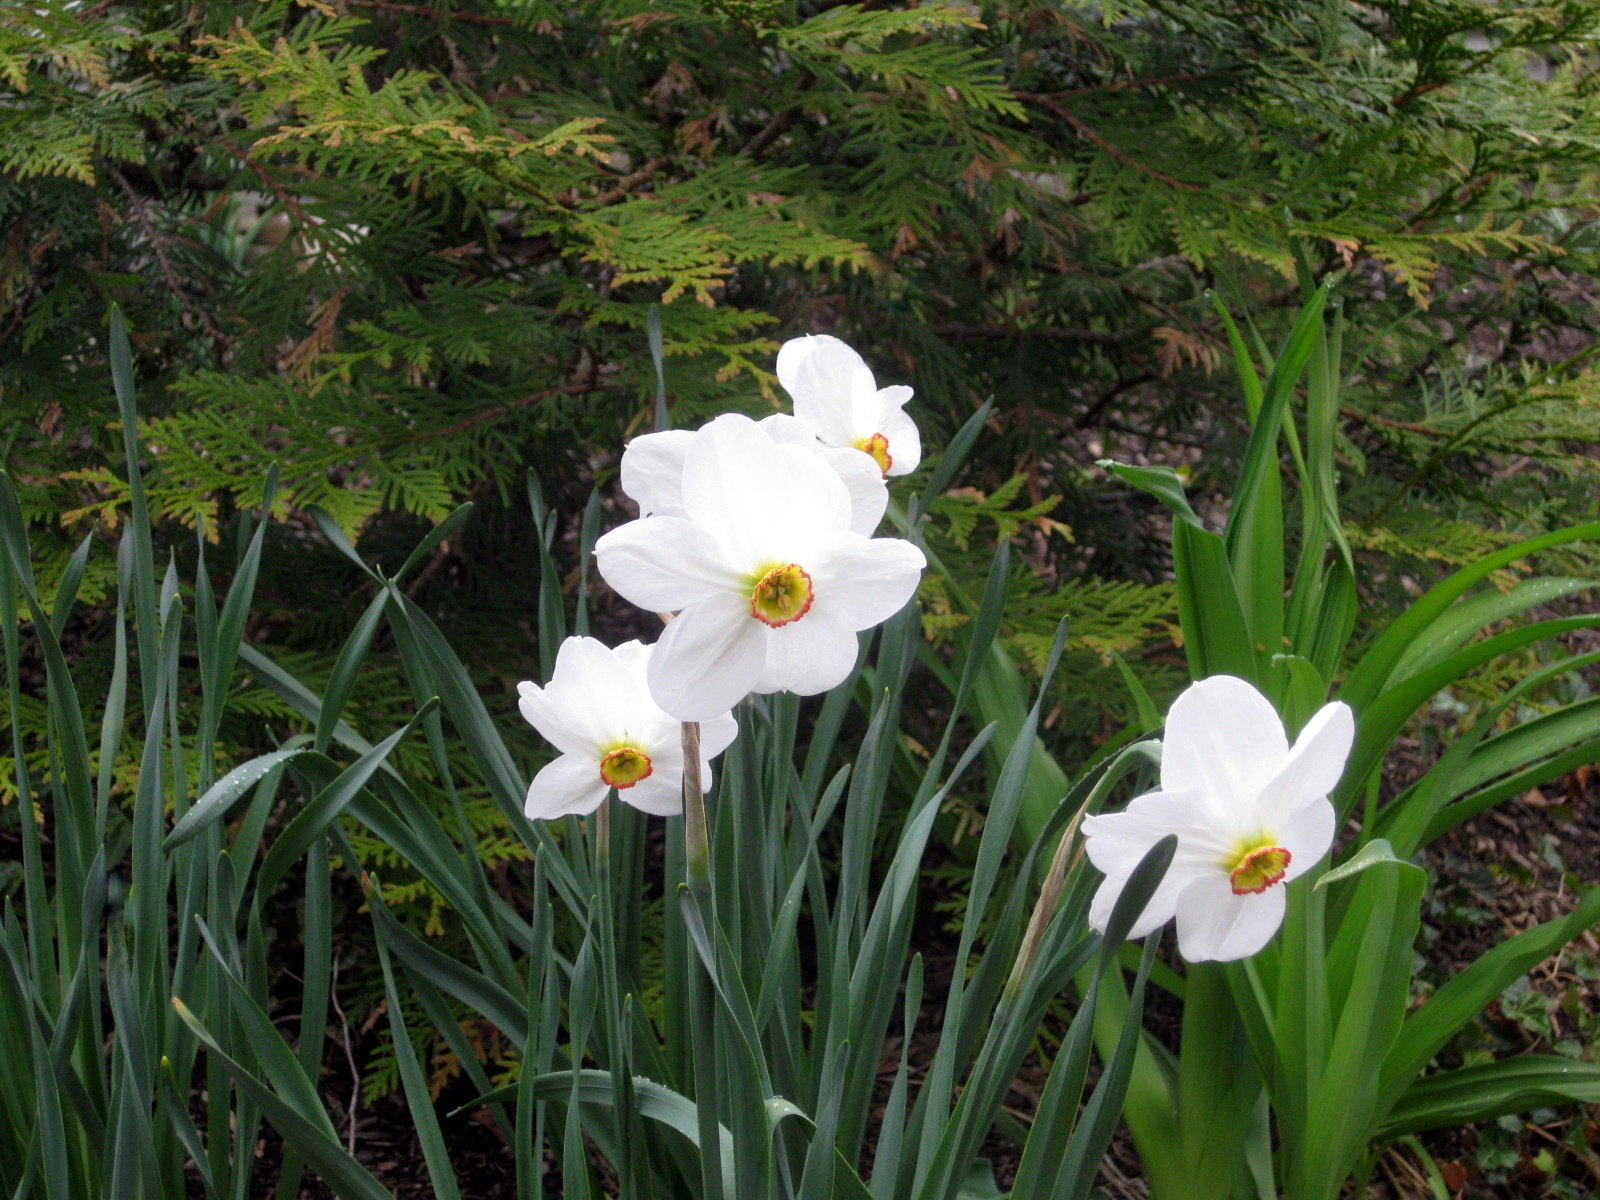 First Aid for Non-Blooming Daffodils